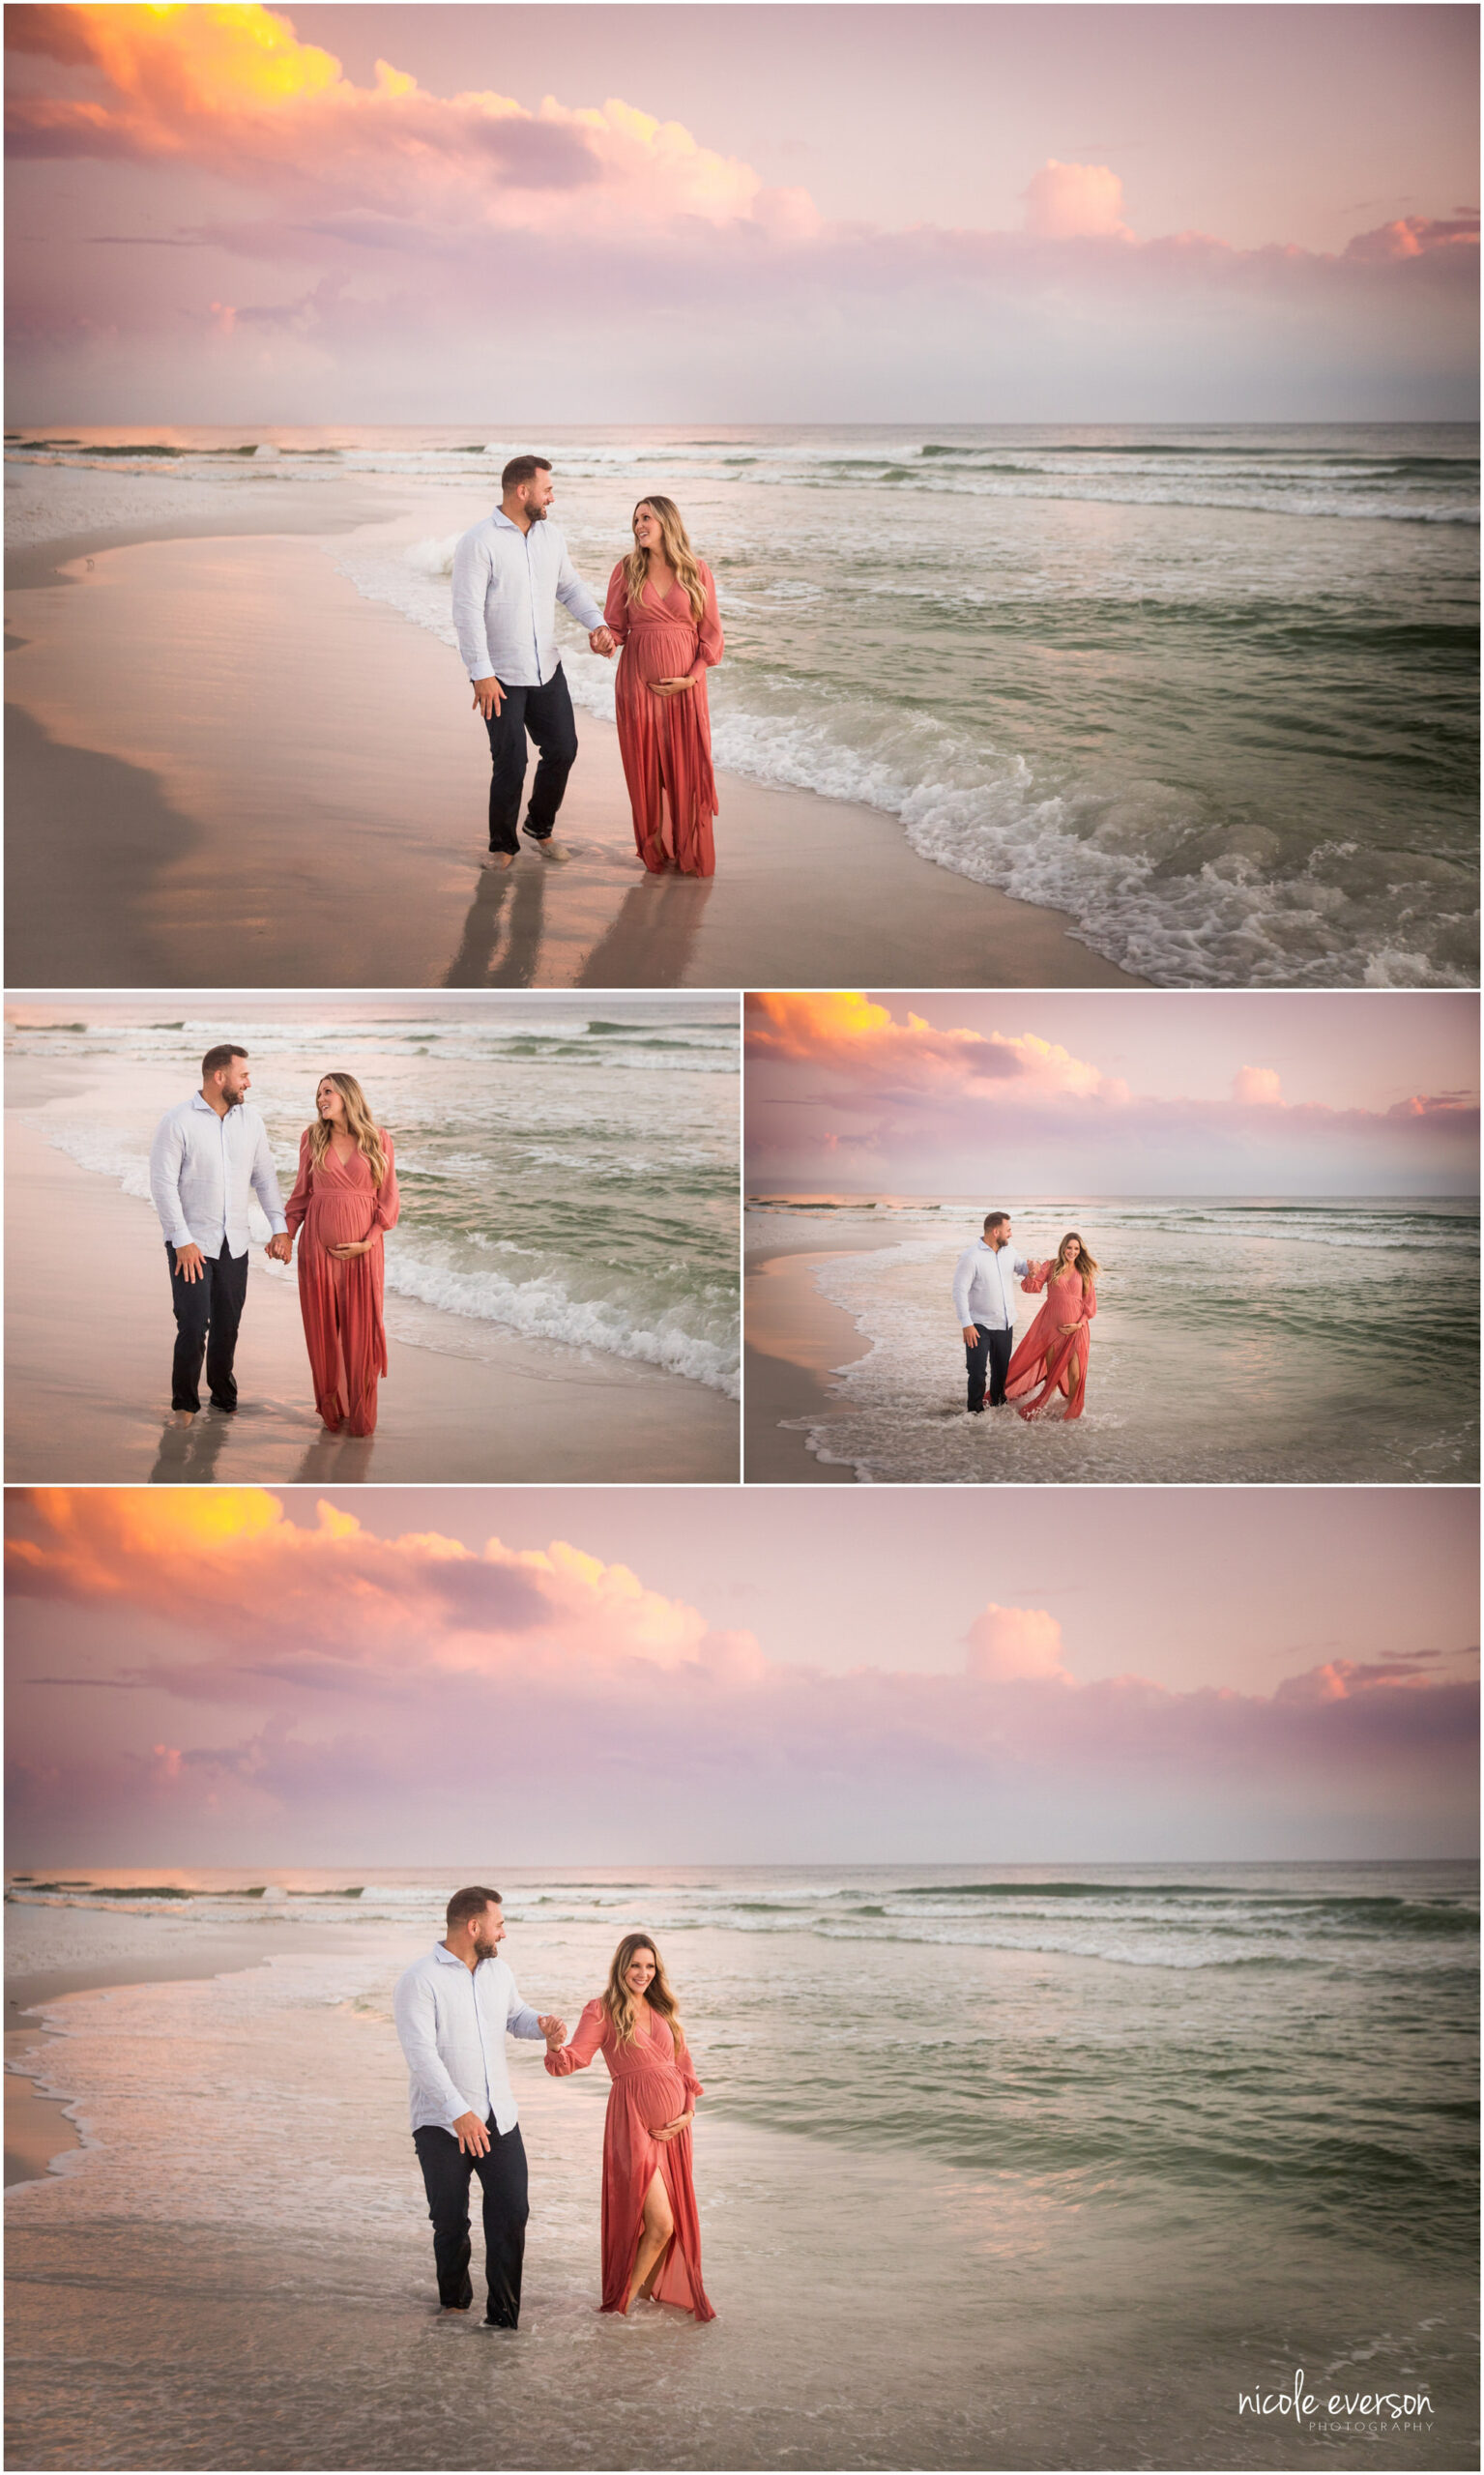 Couple on a Beach in Seaside Florida  at Sunset pregnant with second child 